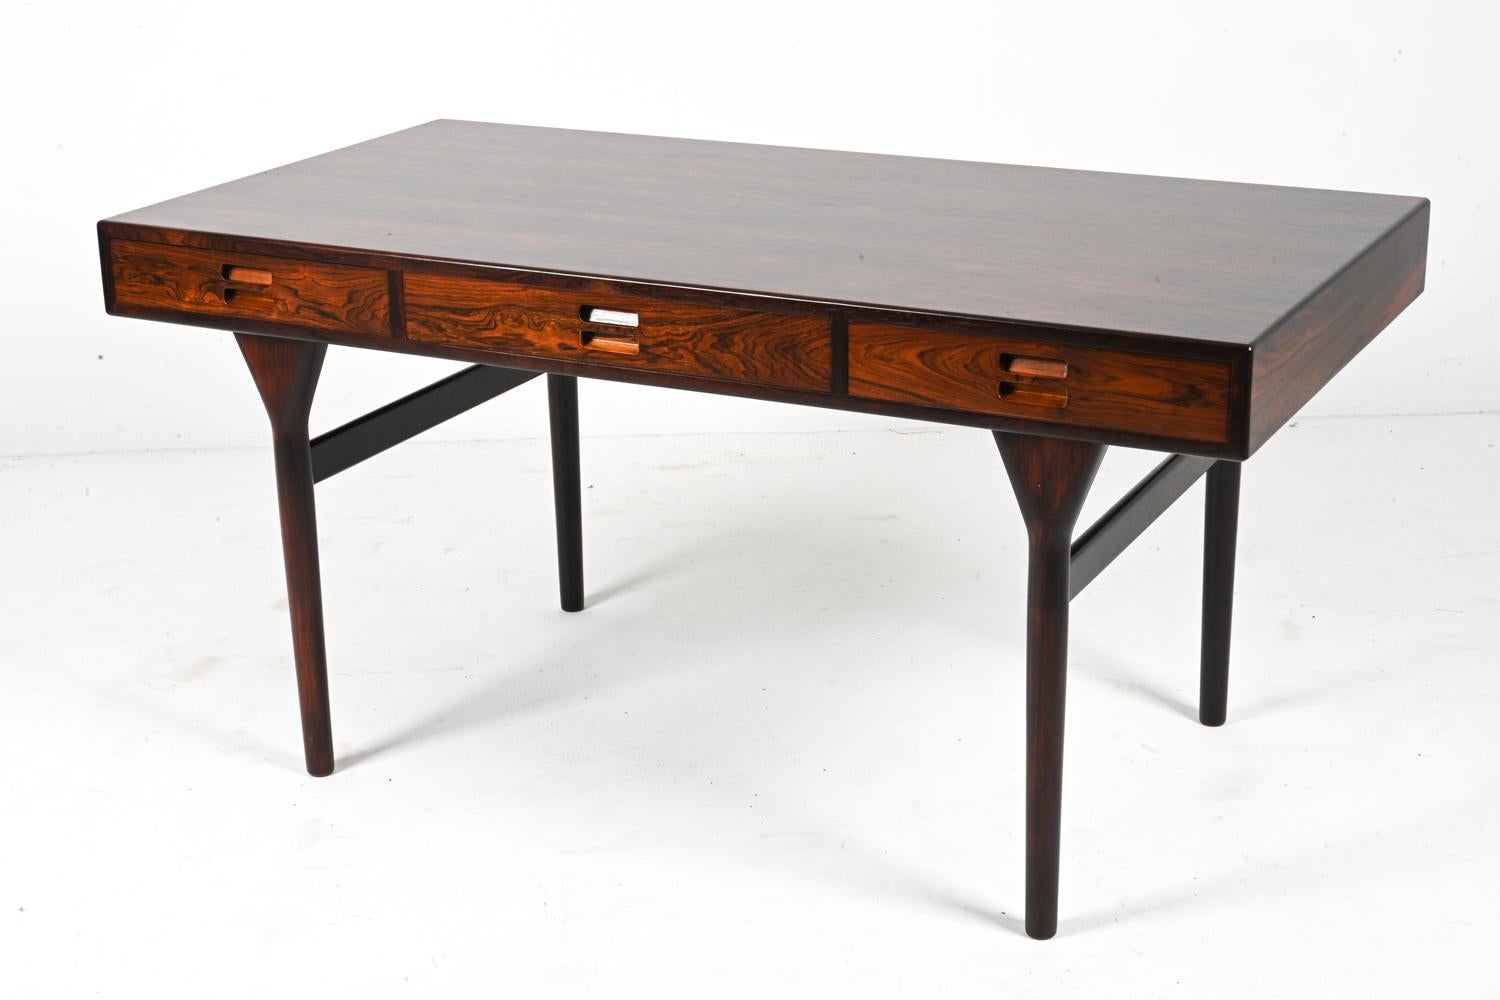 Introducing the exquisite Model ND93 writing desk in rosewood, a timeless masterpiece crafted by the renowned Danish designer Nanna Ditzel for Søren Willadsen in the 1950s. This iconic mid-century modern desk seamlessly blends functionality and